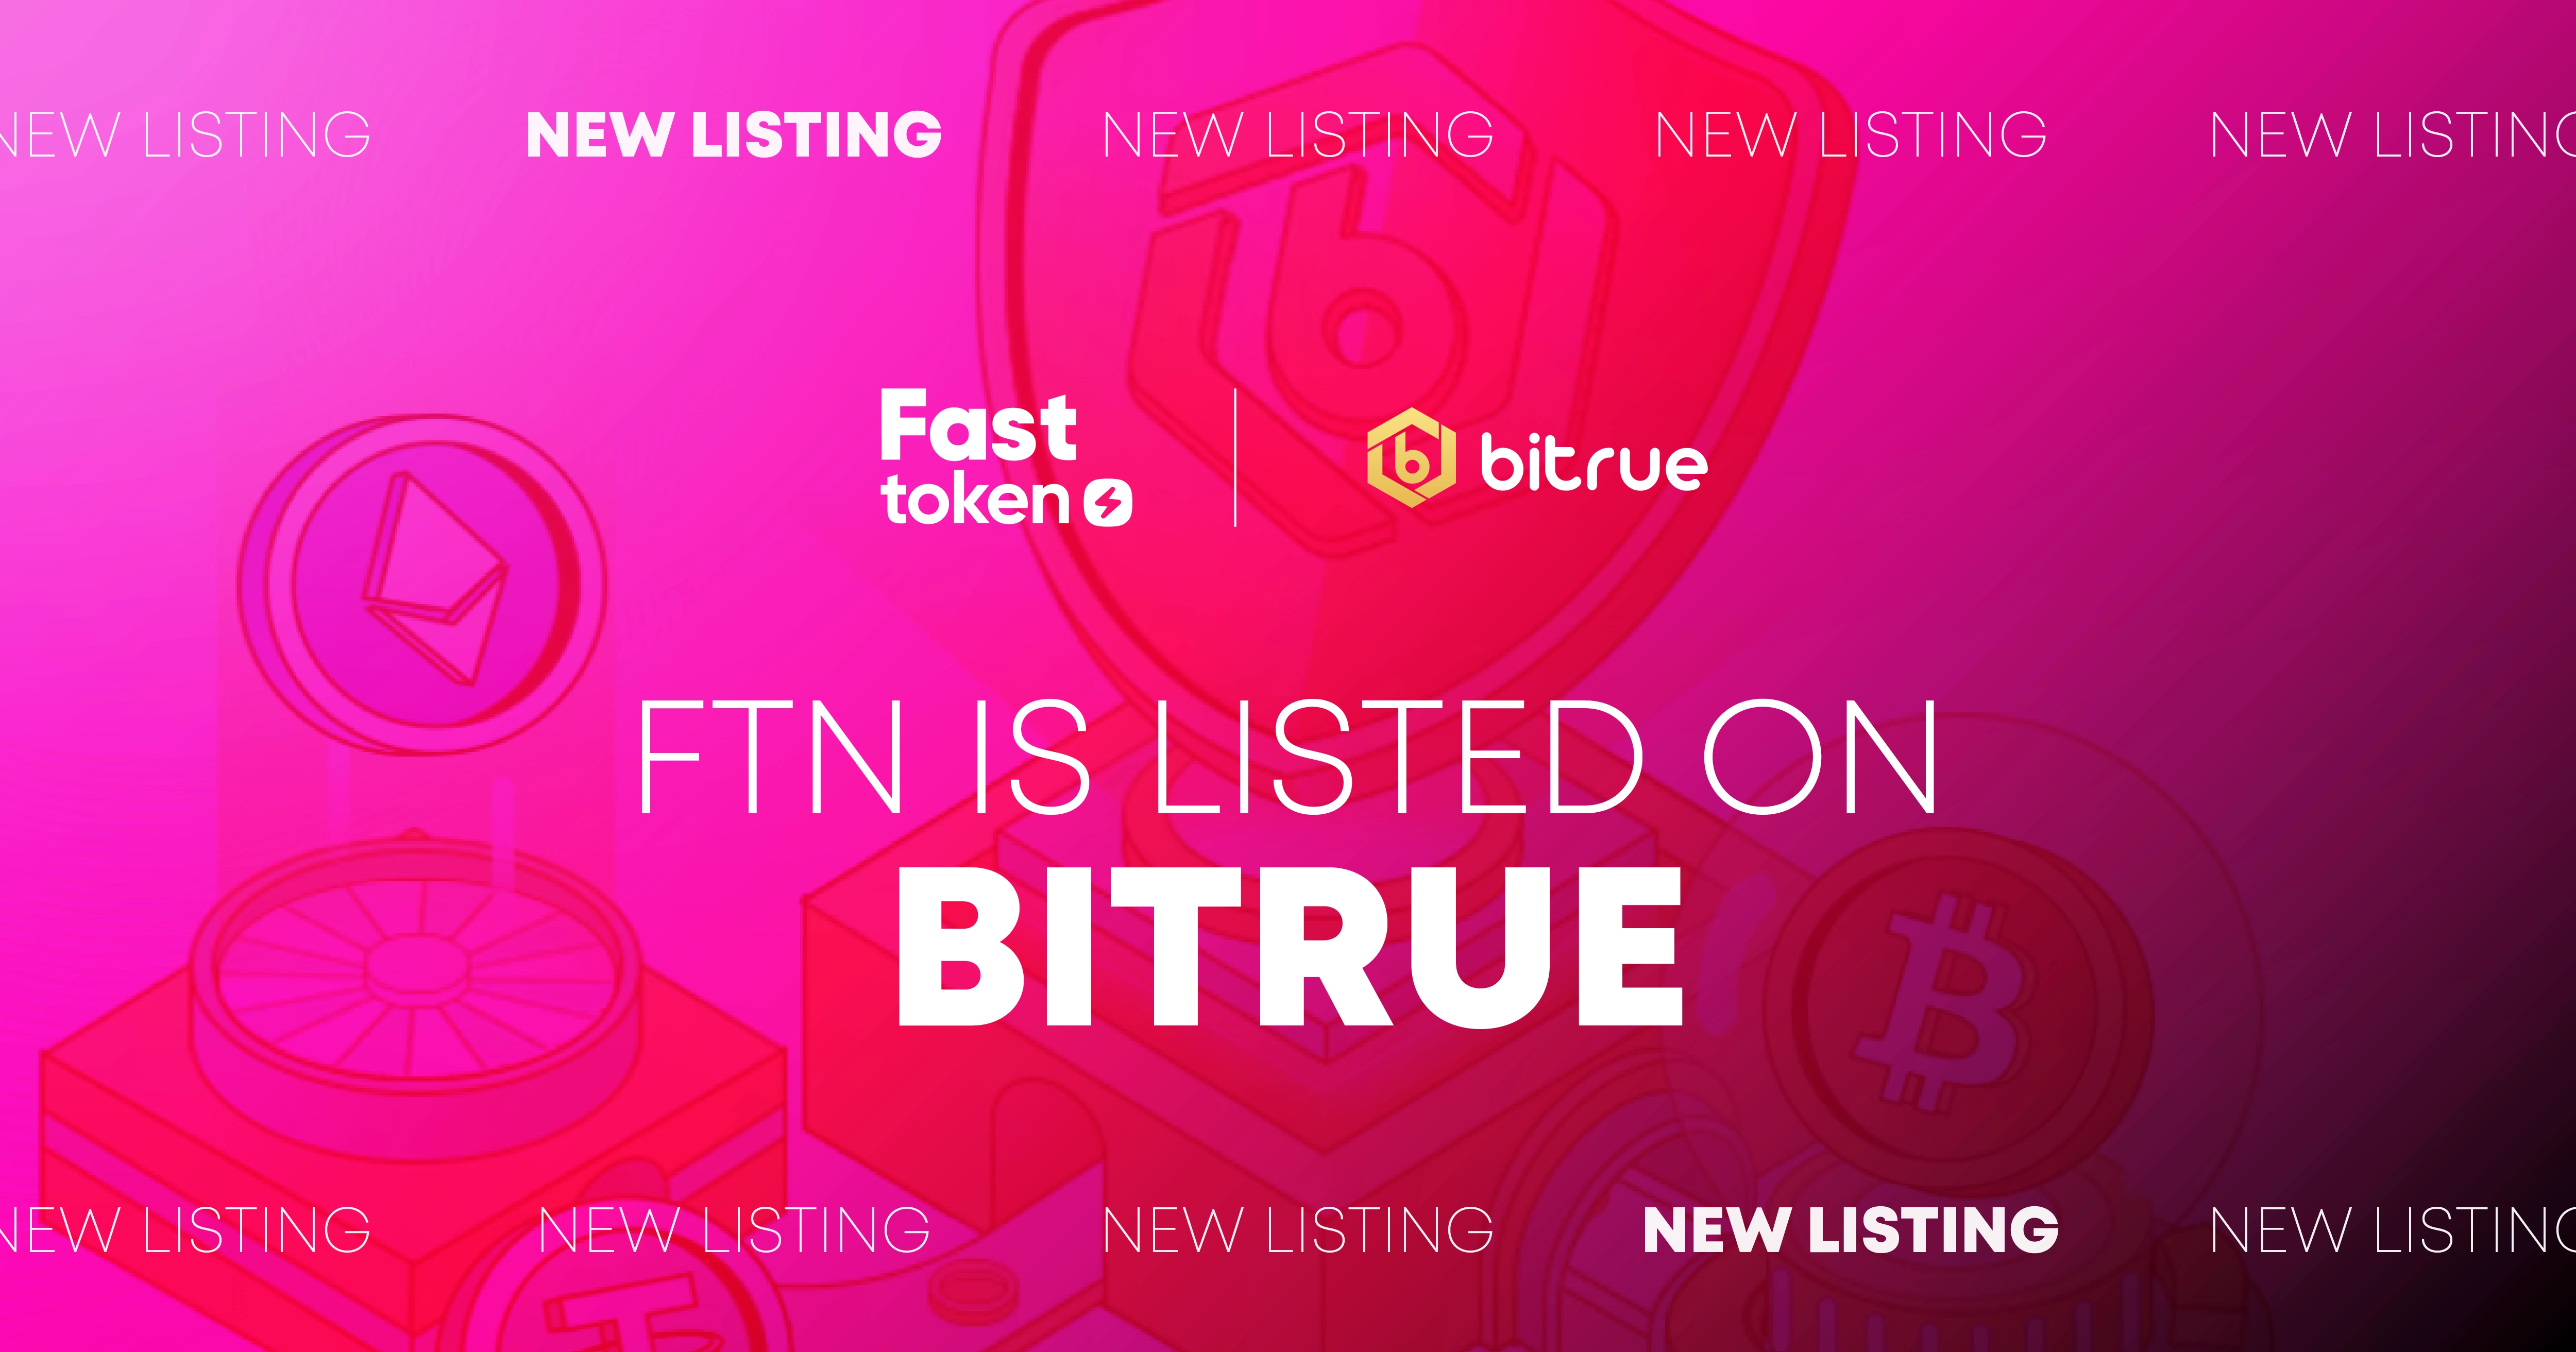 Fasttoken (FTN) is now listed on Bitrue